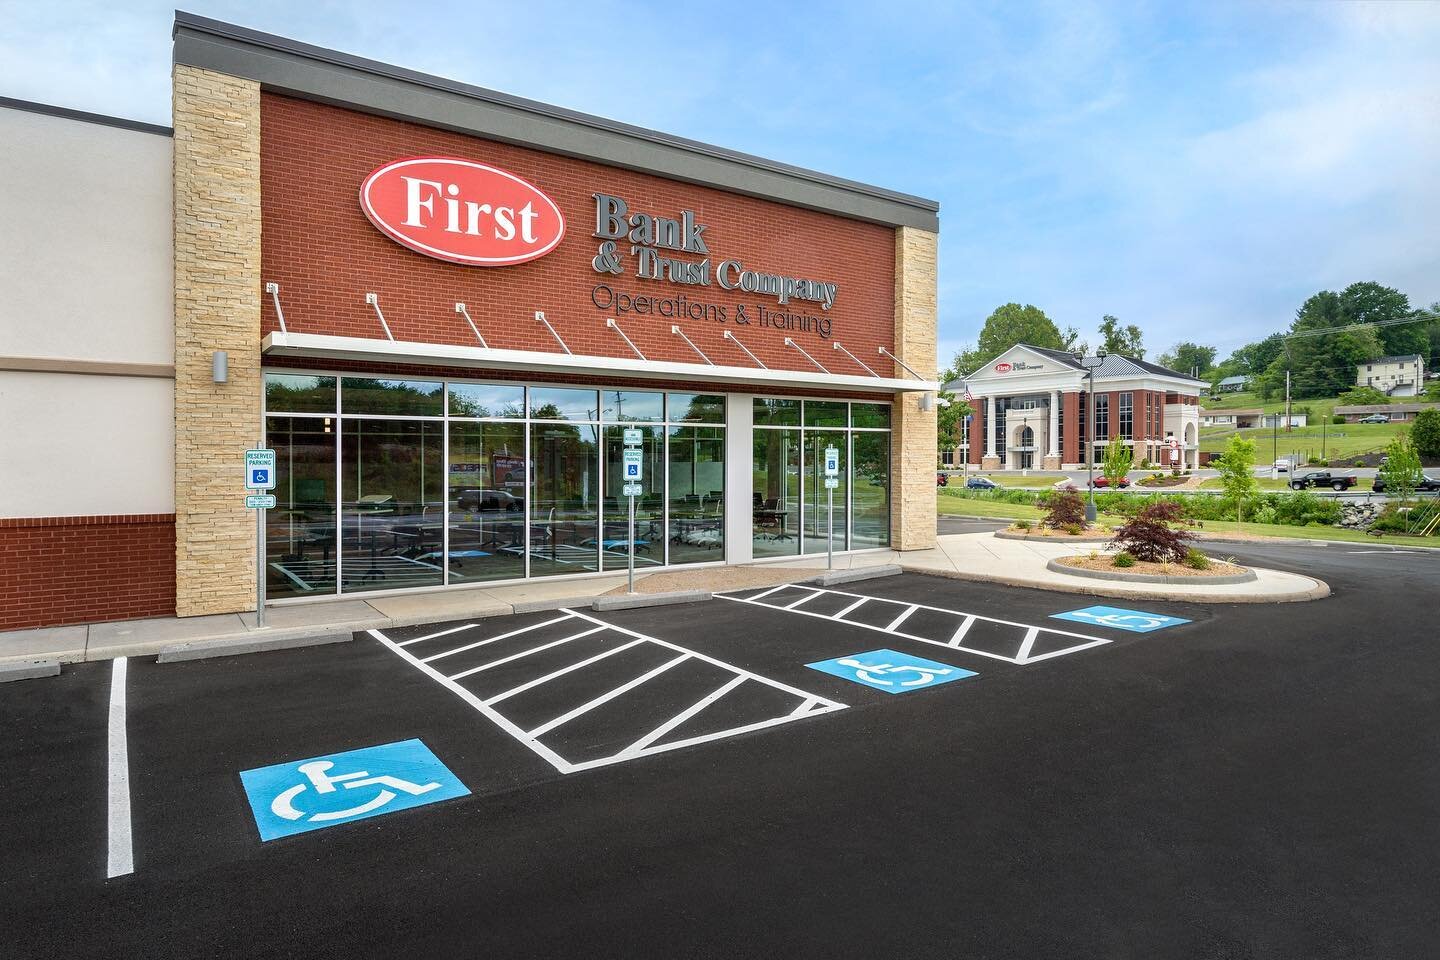 This operations center is an adaptive re-use of an existing Rite Aid into an 11,000 SF office space that will provide new operations support for First Bank &amp; Trust. A focus was put on efficiently re-using existing infrastructure while providing a